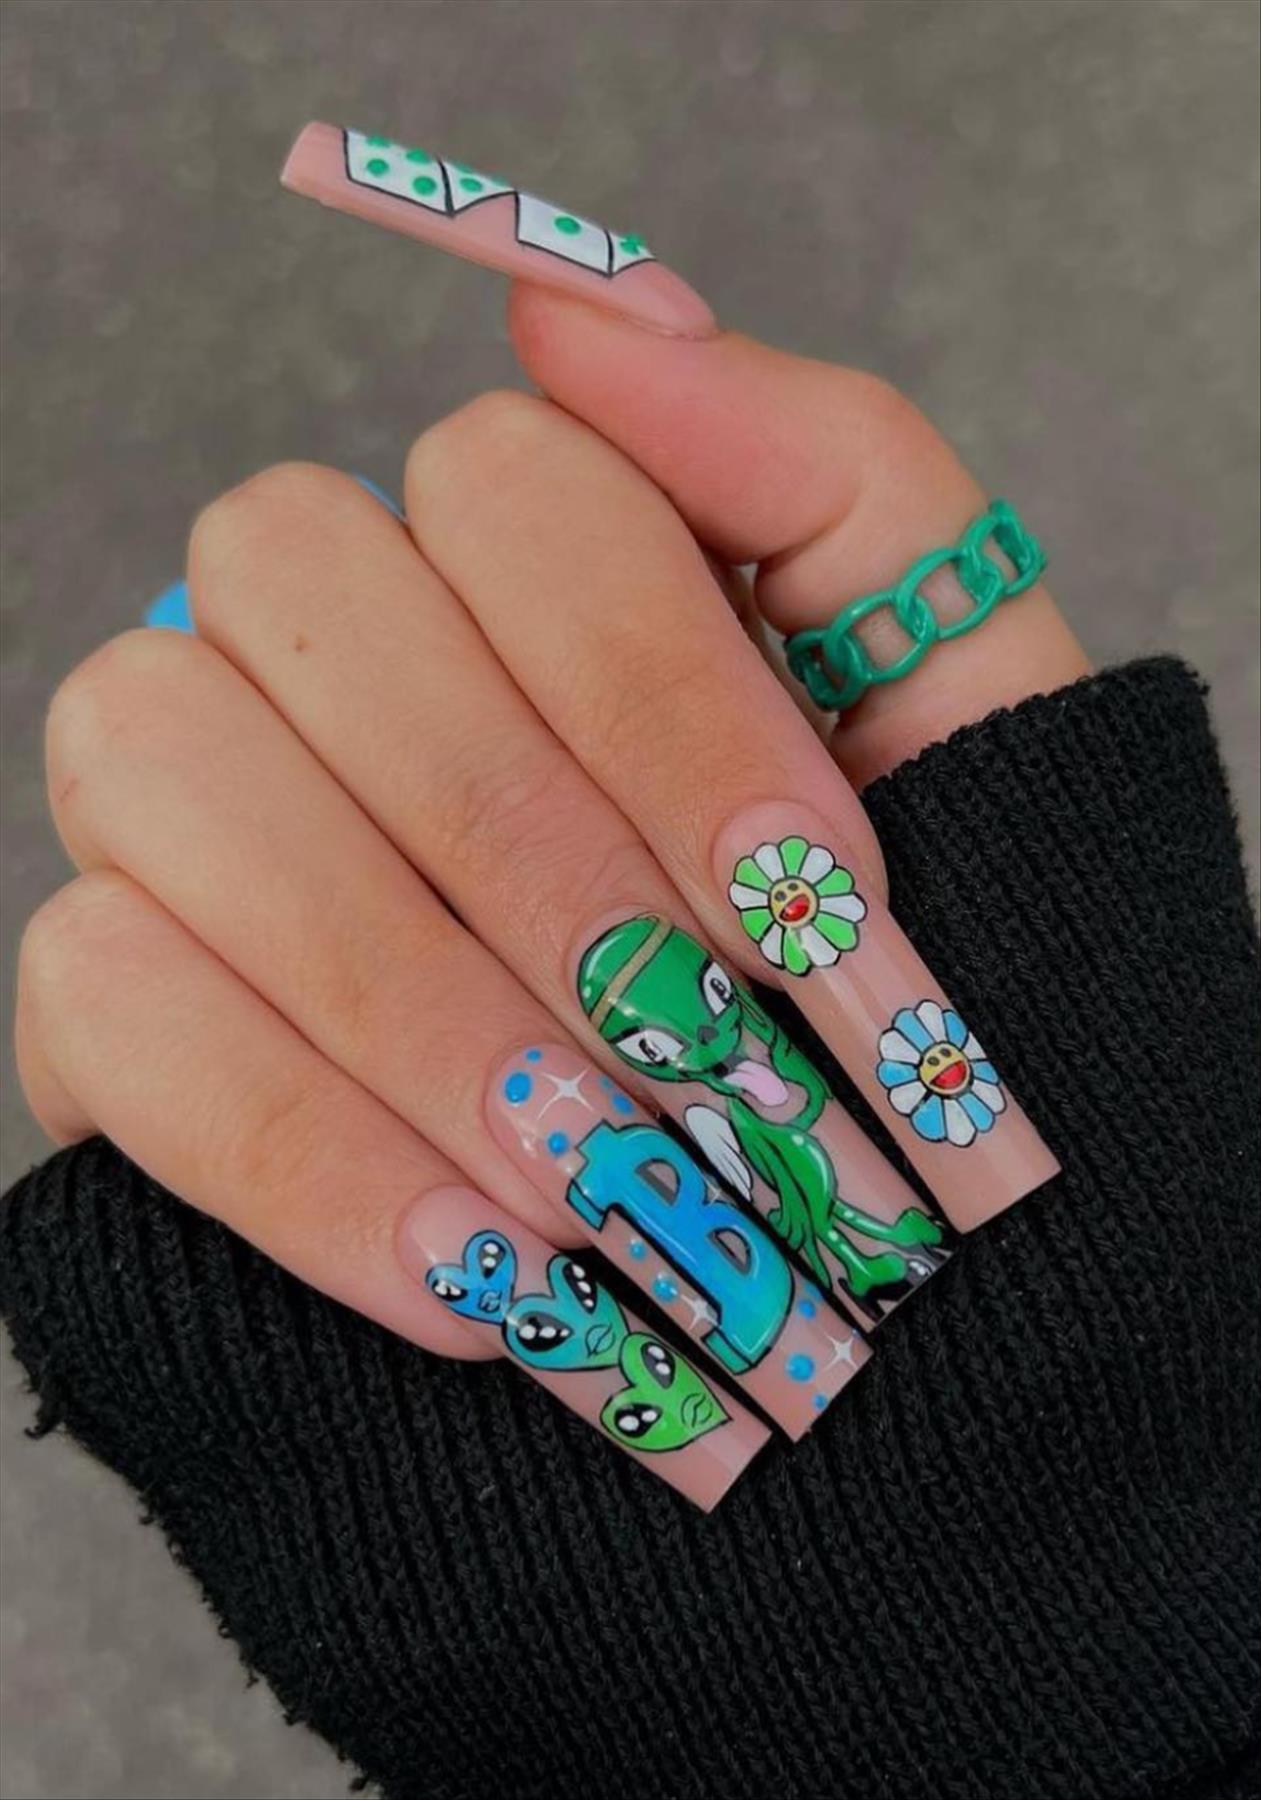 Classy acrylic coffin nails art inspiration in 2022